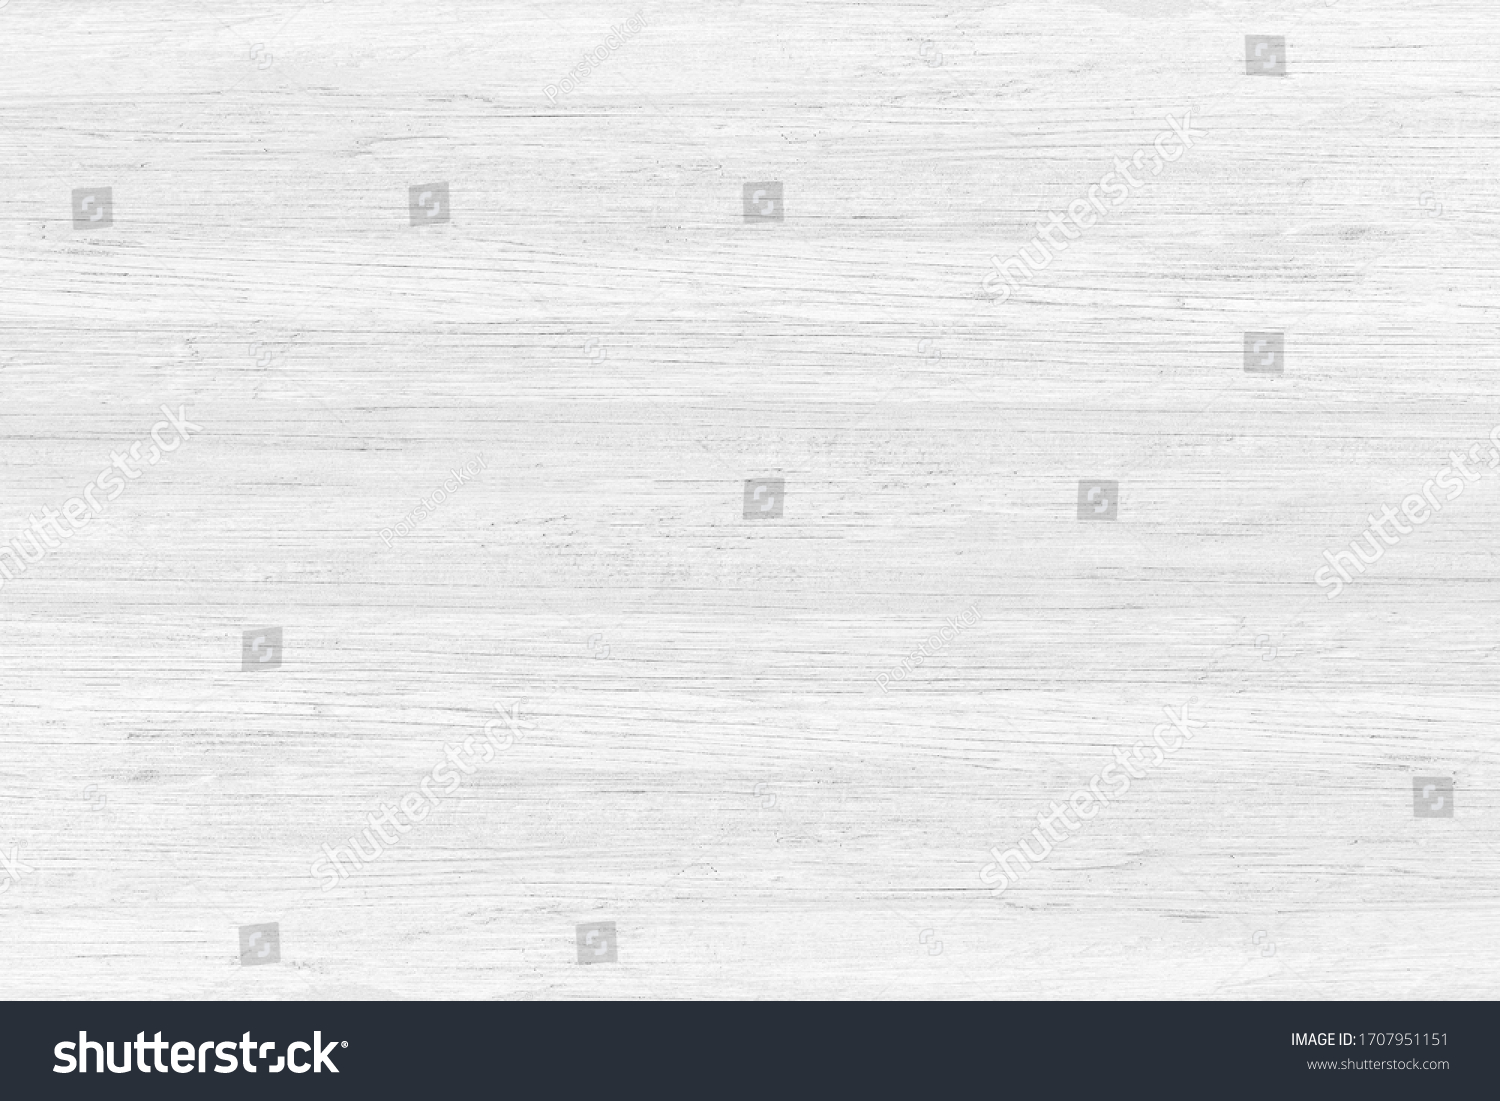 White soft wood plank texture. Wooden tabletop background. #1707951151